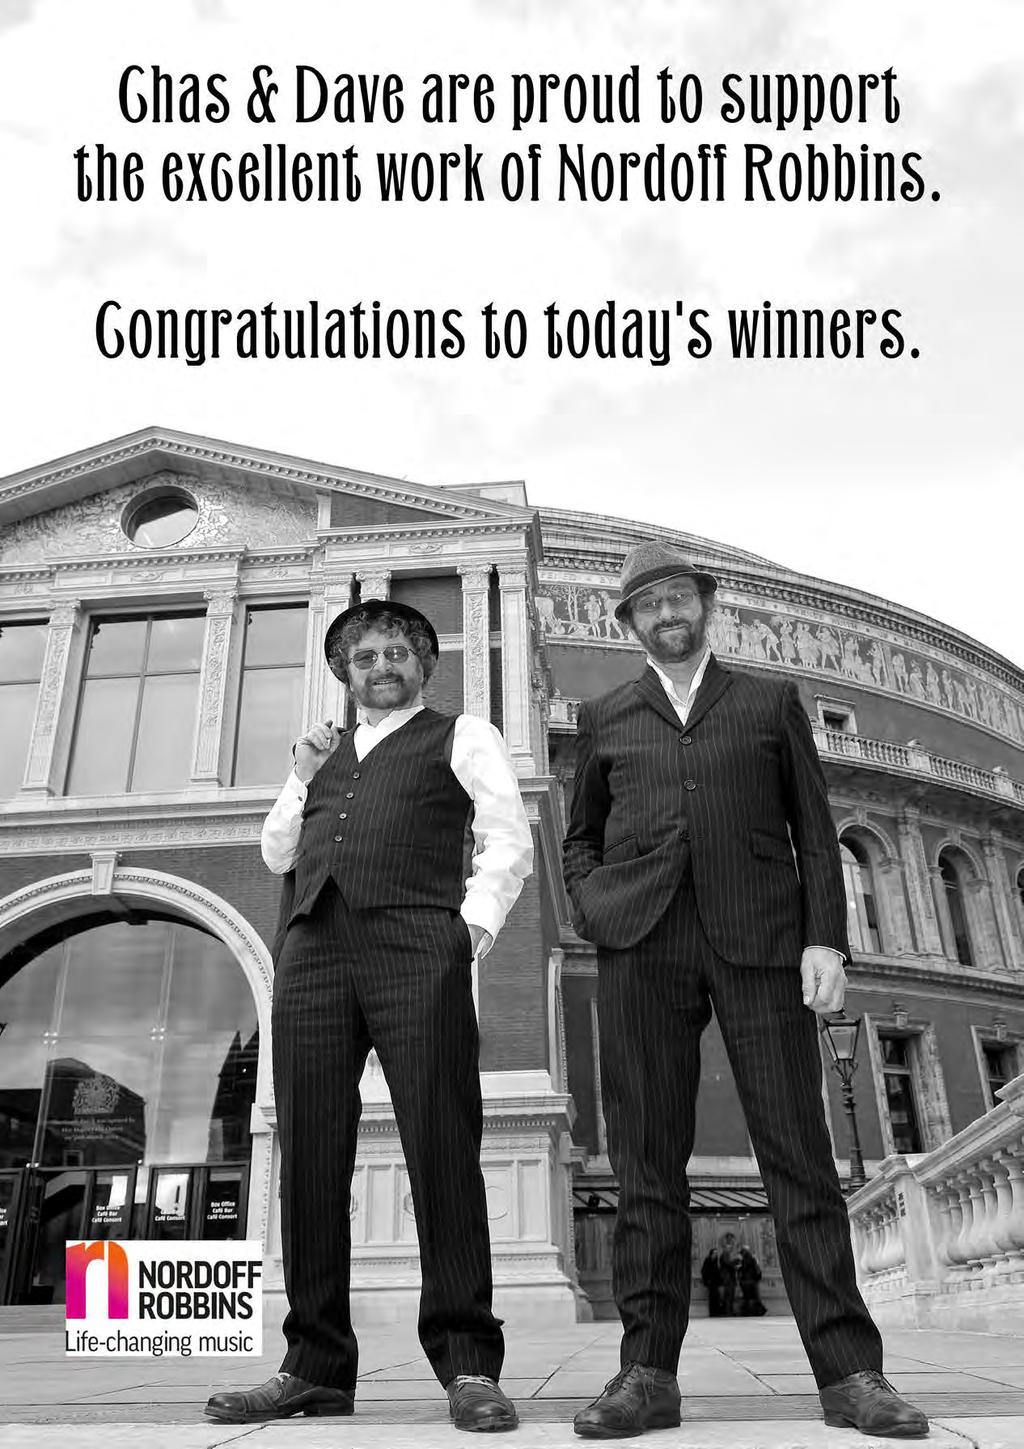 rockney productions (chas & dave) curry meets comedy INTERCONTINENTAL HOTEL PARK LANE, LONDON Pub landlord